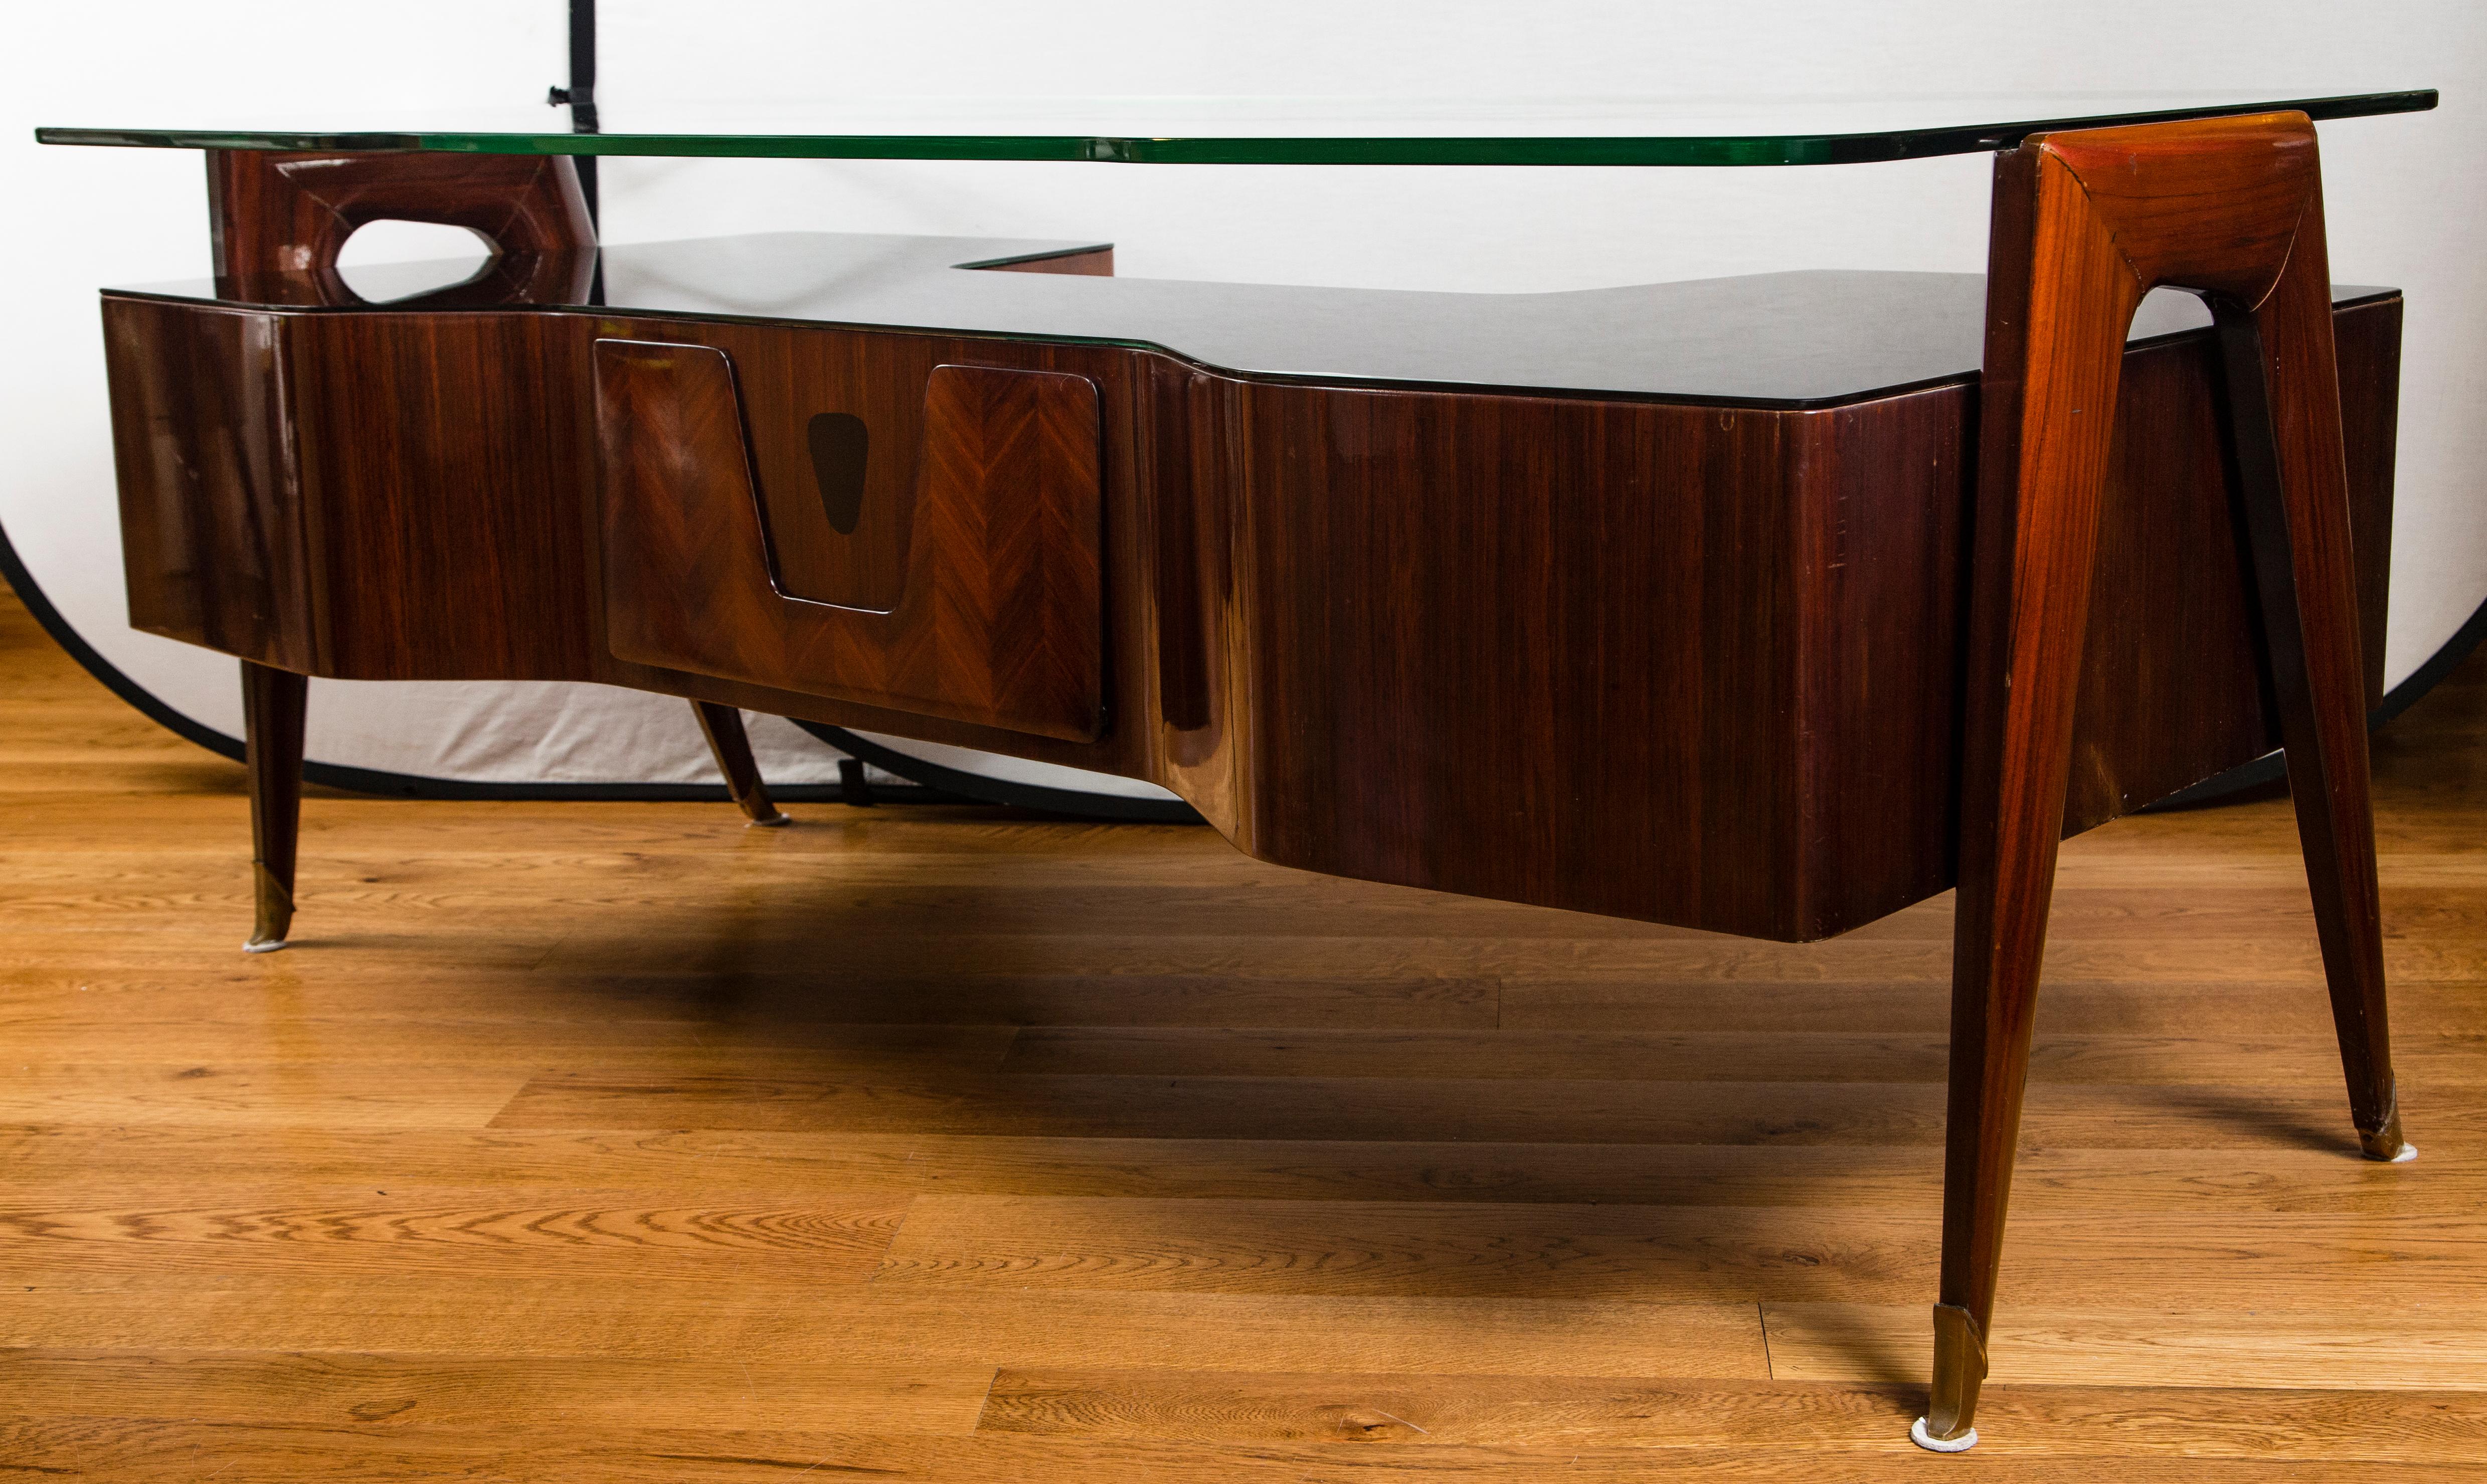 Stunning midcentury desk in rosewood, designed by Vittorio Dassi and produced upon order in Italy in the 1950s for professionals. The thick floating glass top rests on the desk legs while a thin black glass envelopes the top body of the desk,